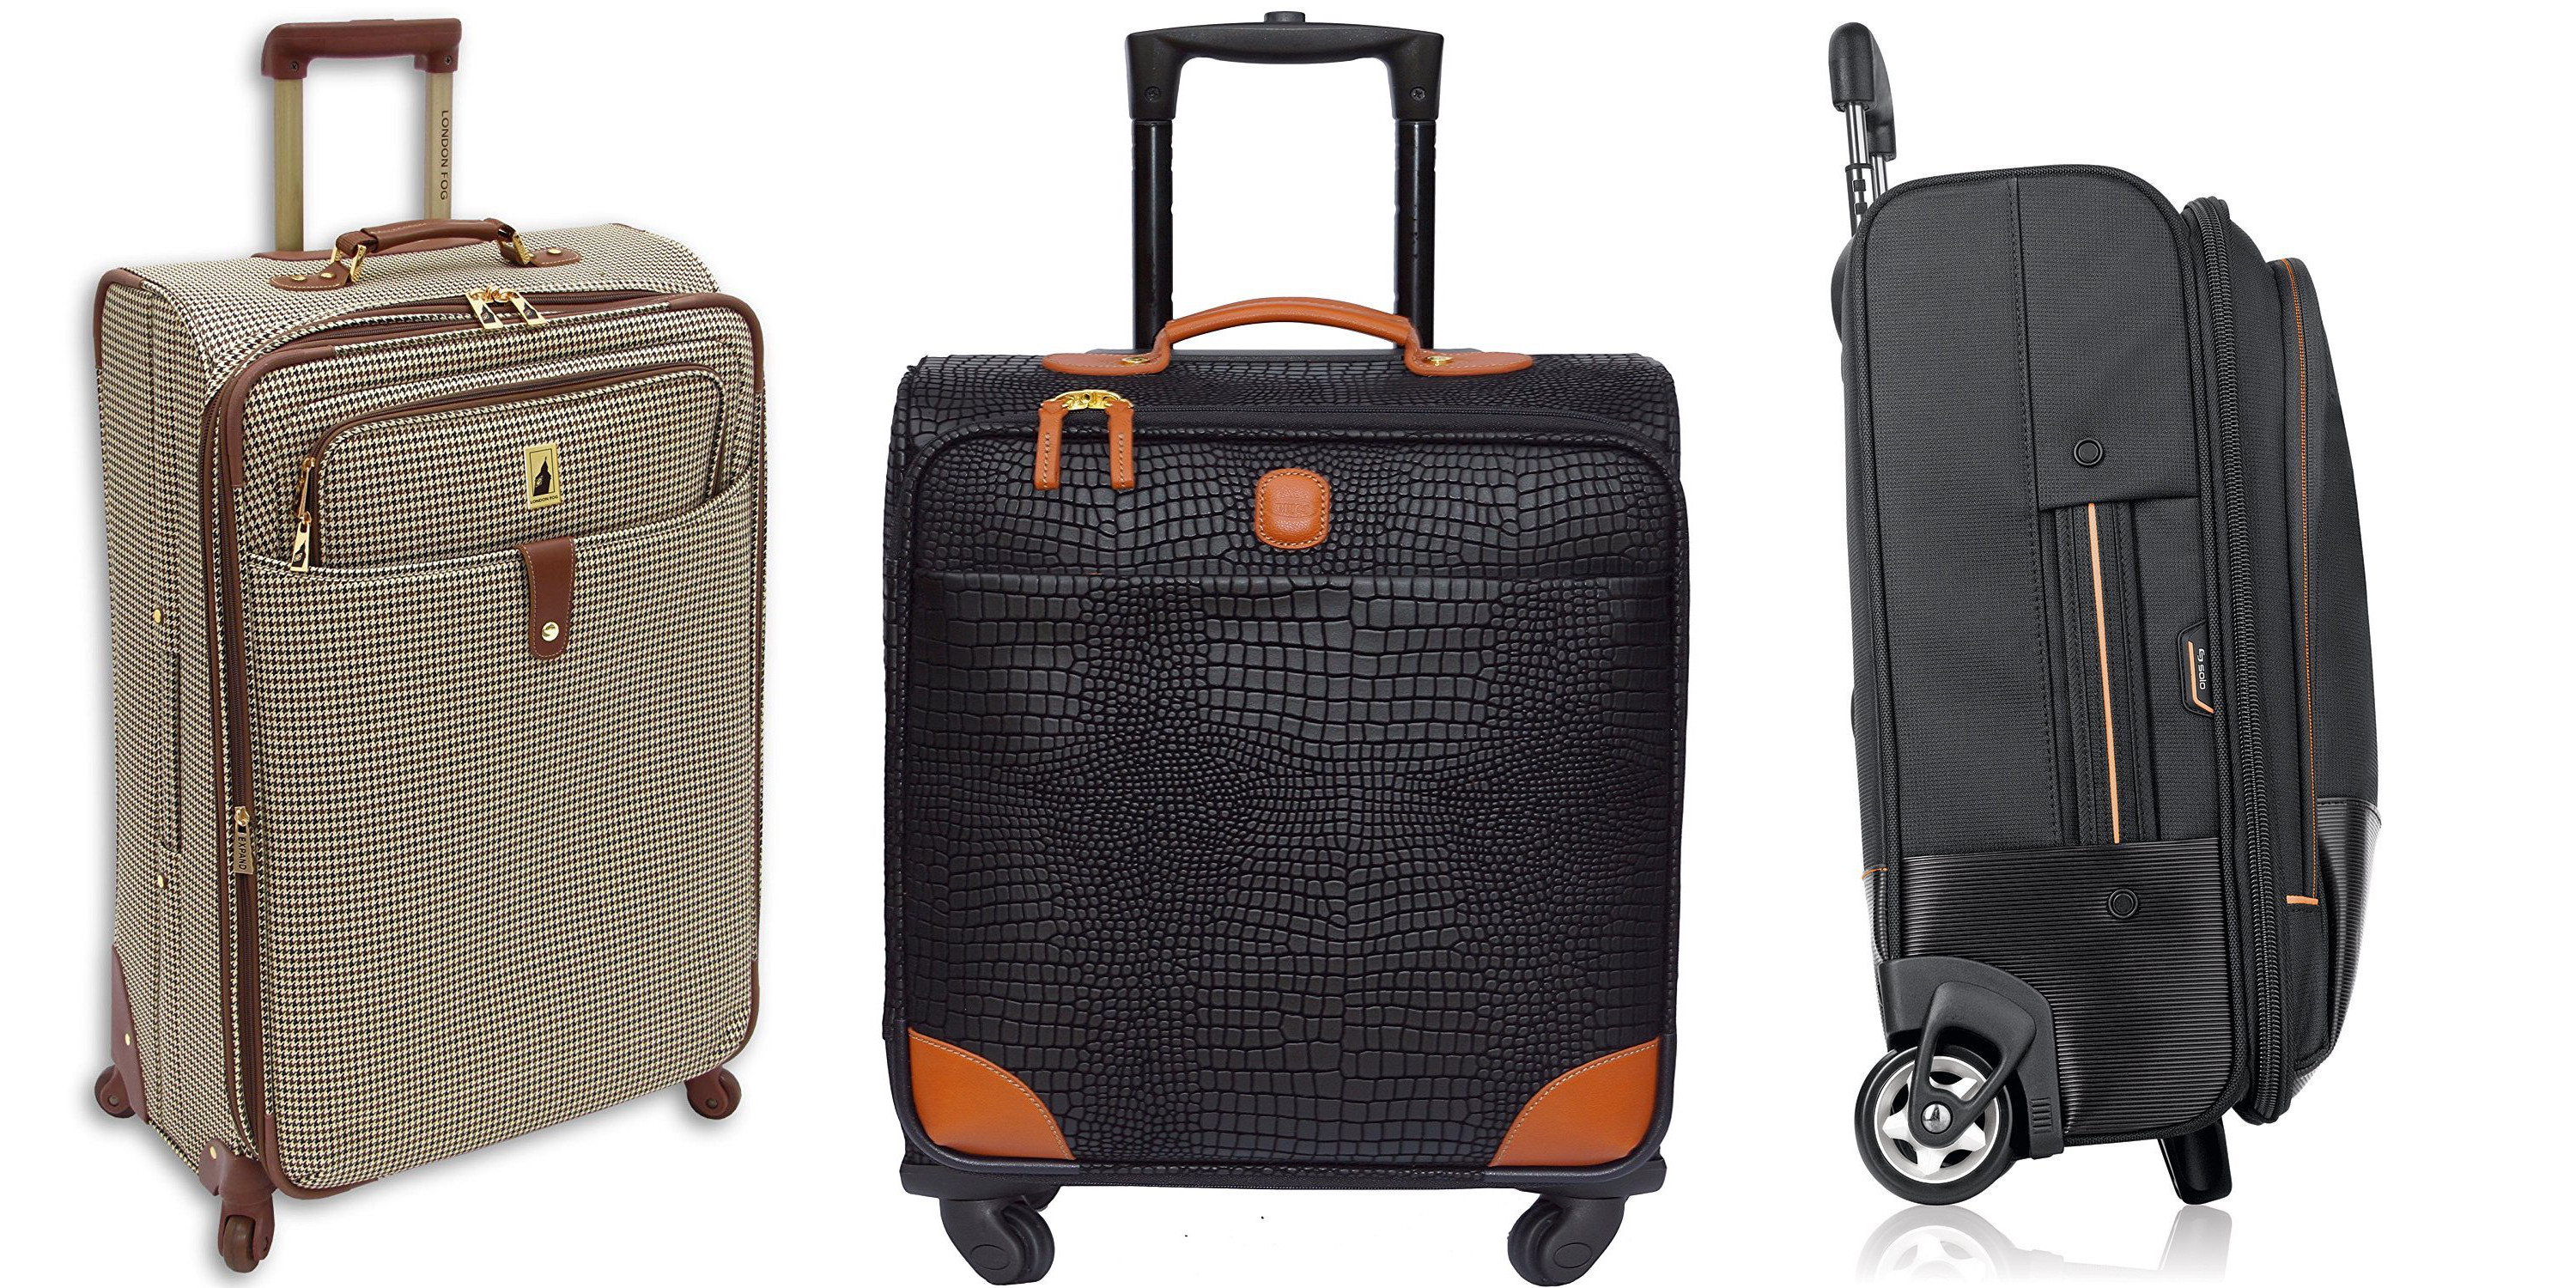 Amazon Luggage Sale 60% off: Urban Roller $54, Leather Carry-on $190, more - 9to5Toys